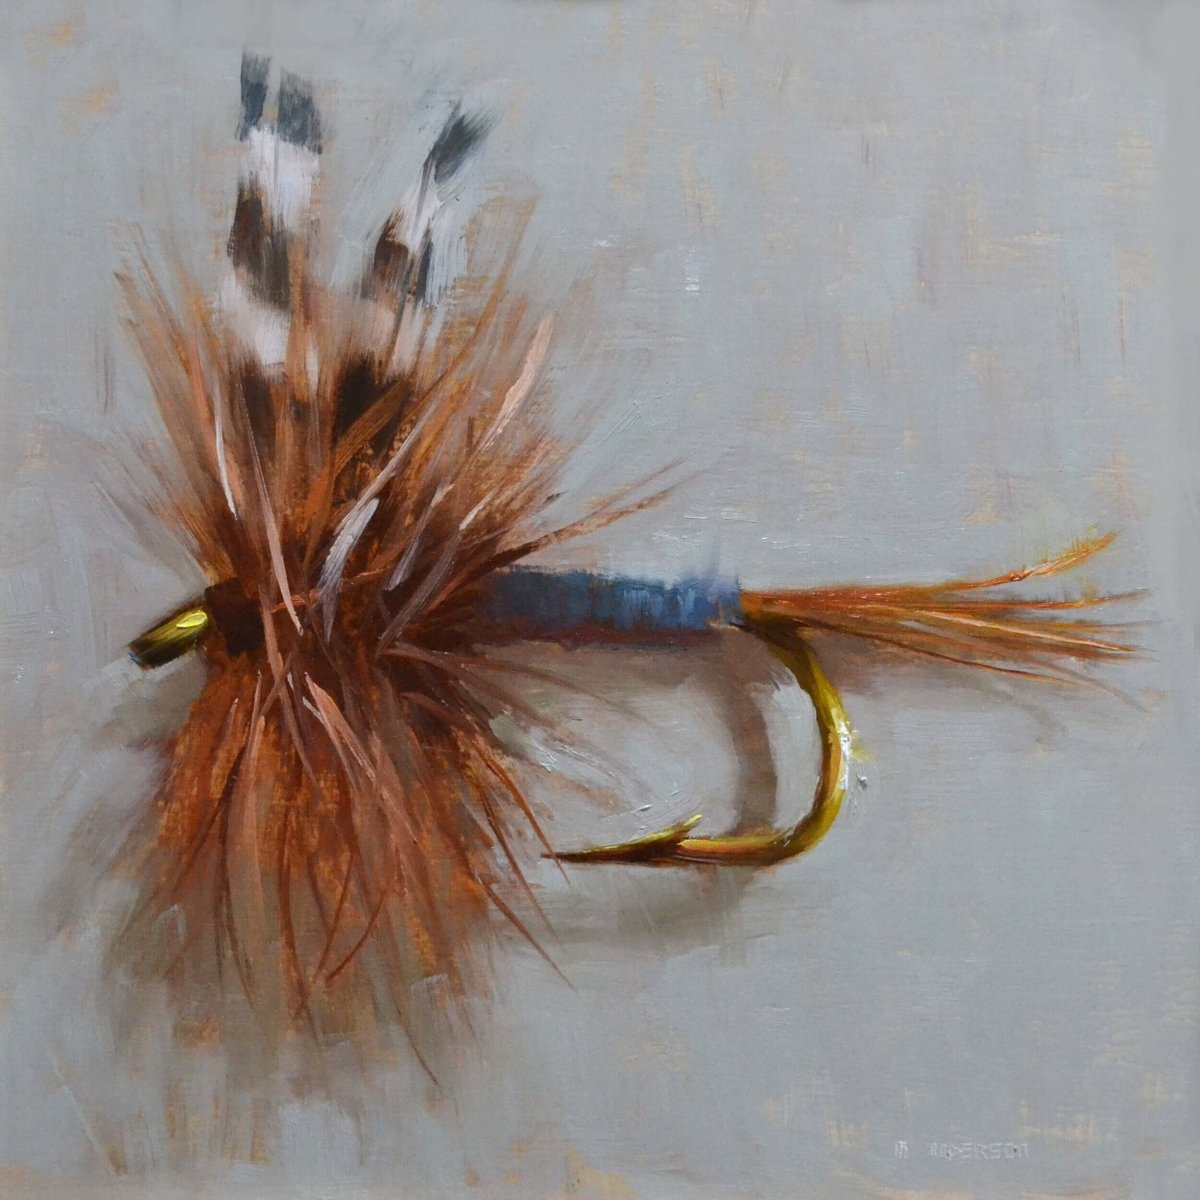 Adams Fly II by Marc Anderson at LePrince Galleries